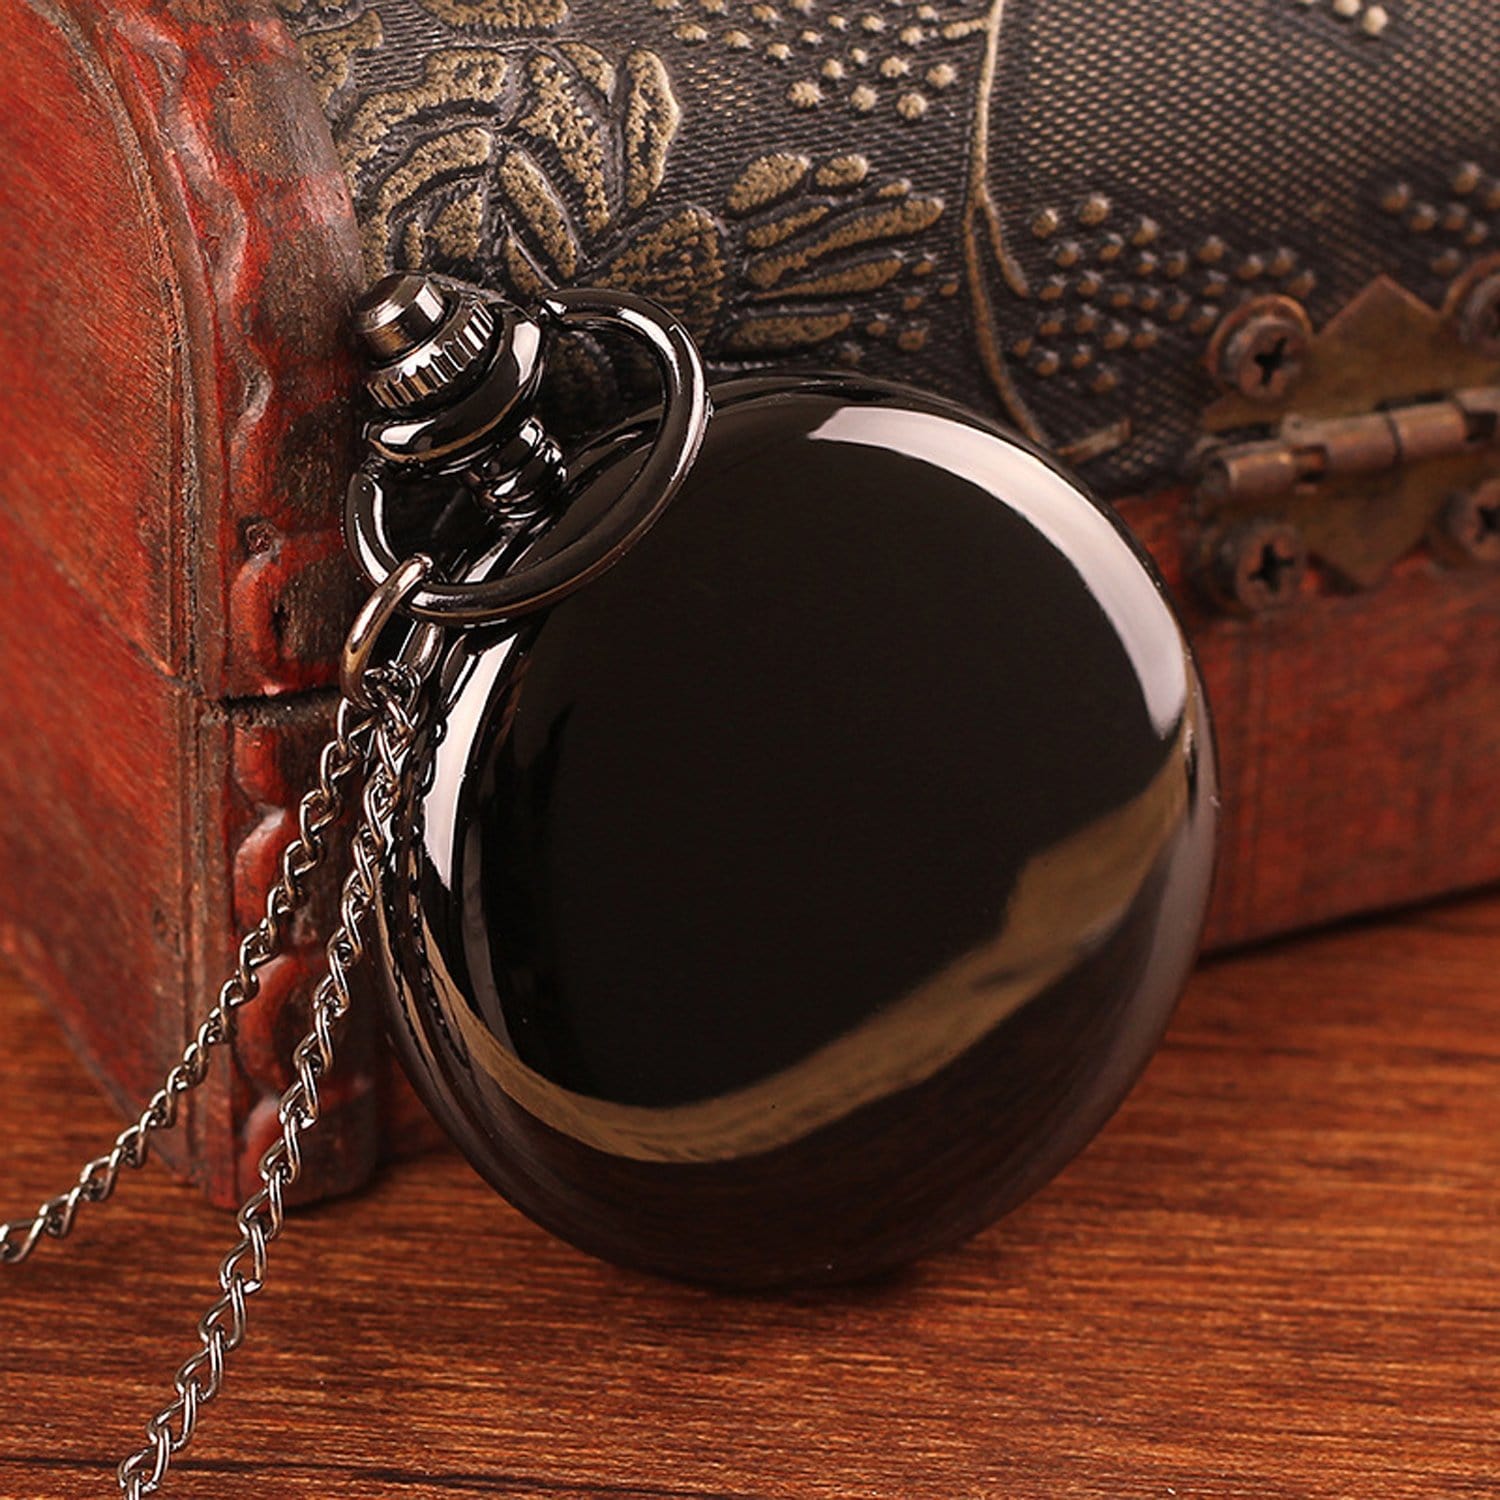 Pocket Watches To My Boyfriend - I Love You For All That You Are Pocket Watch GiveMe-Gifts